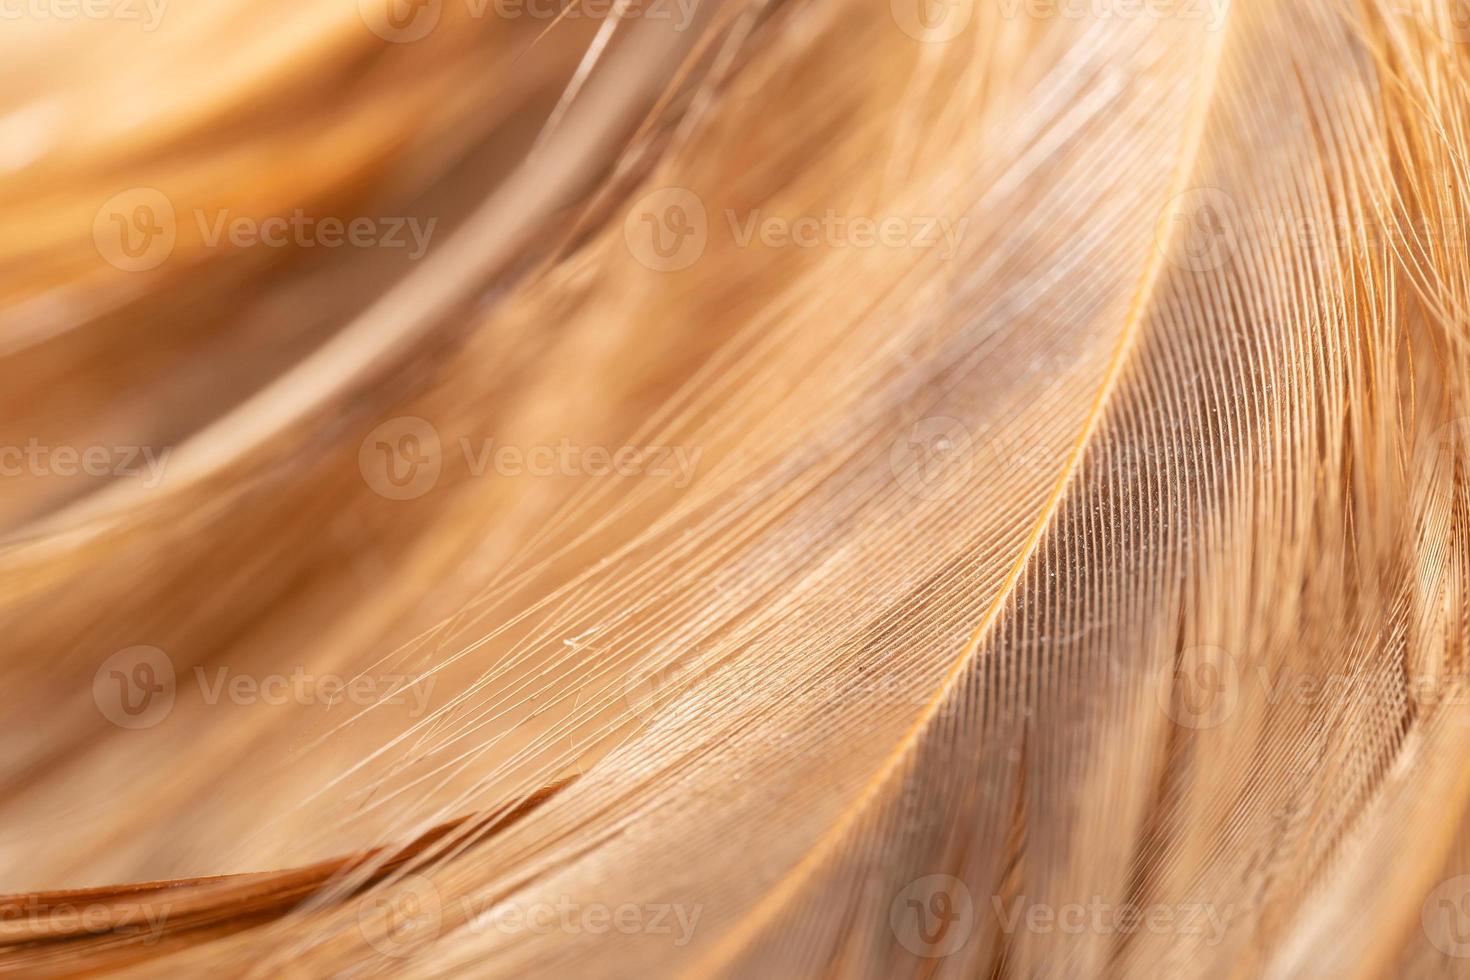 The chicken feathers are tied into a wooden feather for cleaning. Beautiful abstract feathers and soft yellow feather texture. photo